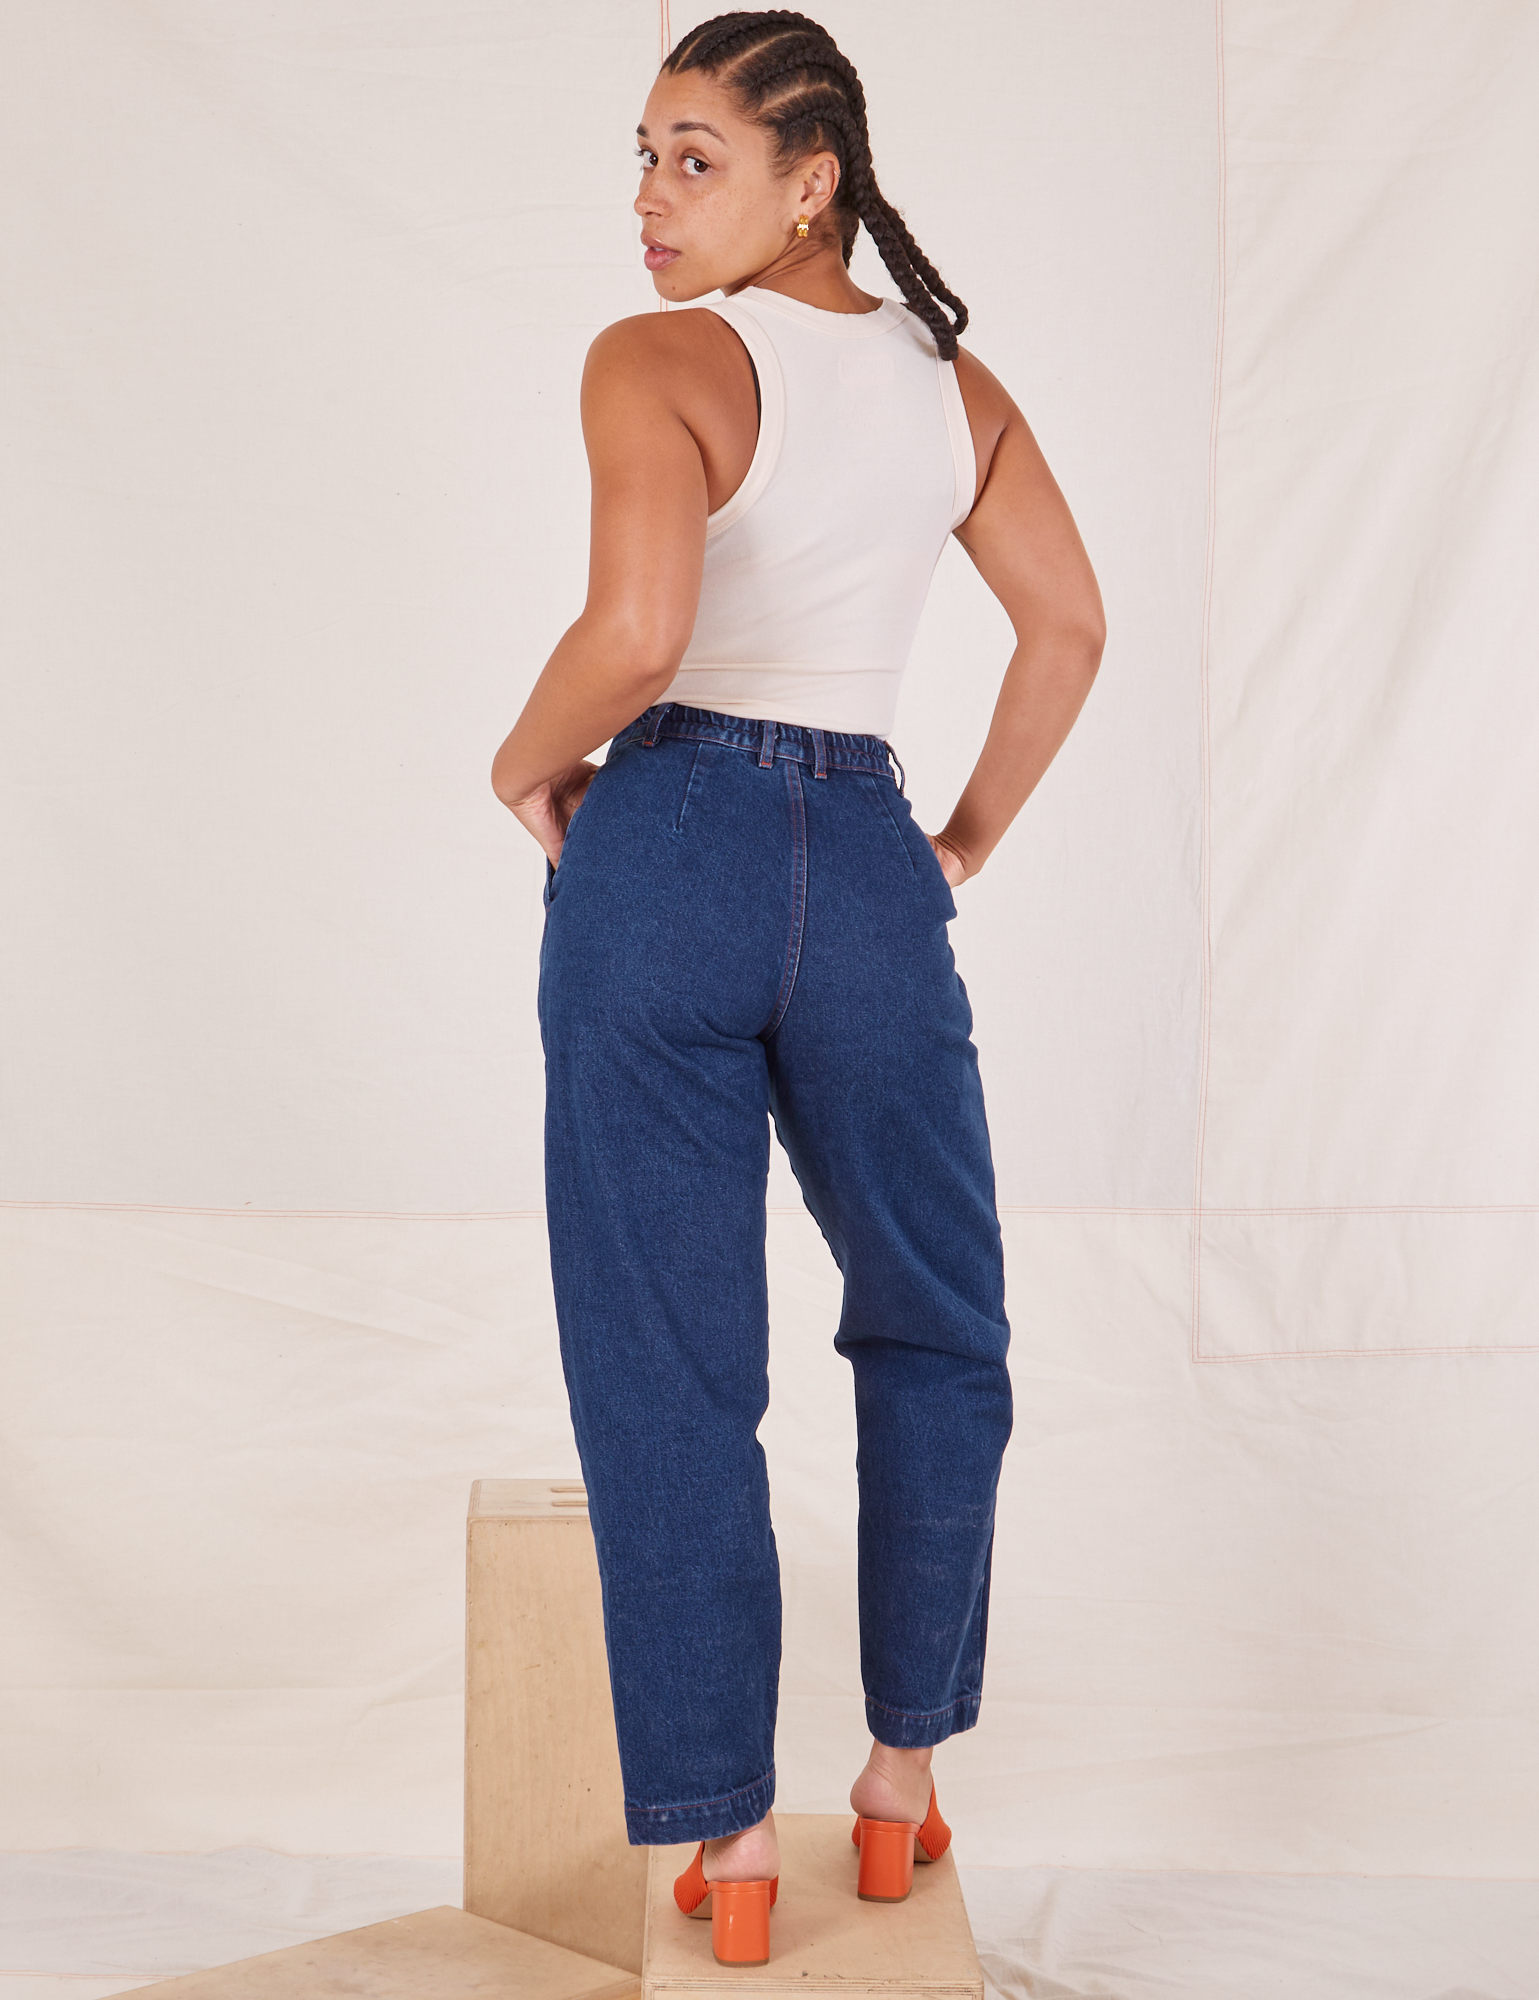 Back view of Denim Trouser Jeans in Dark Wash and Tank Top in vintage tee off-white worn by Gabi